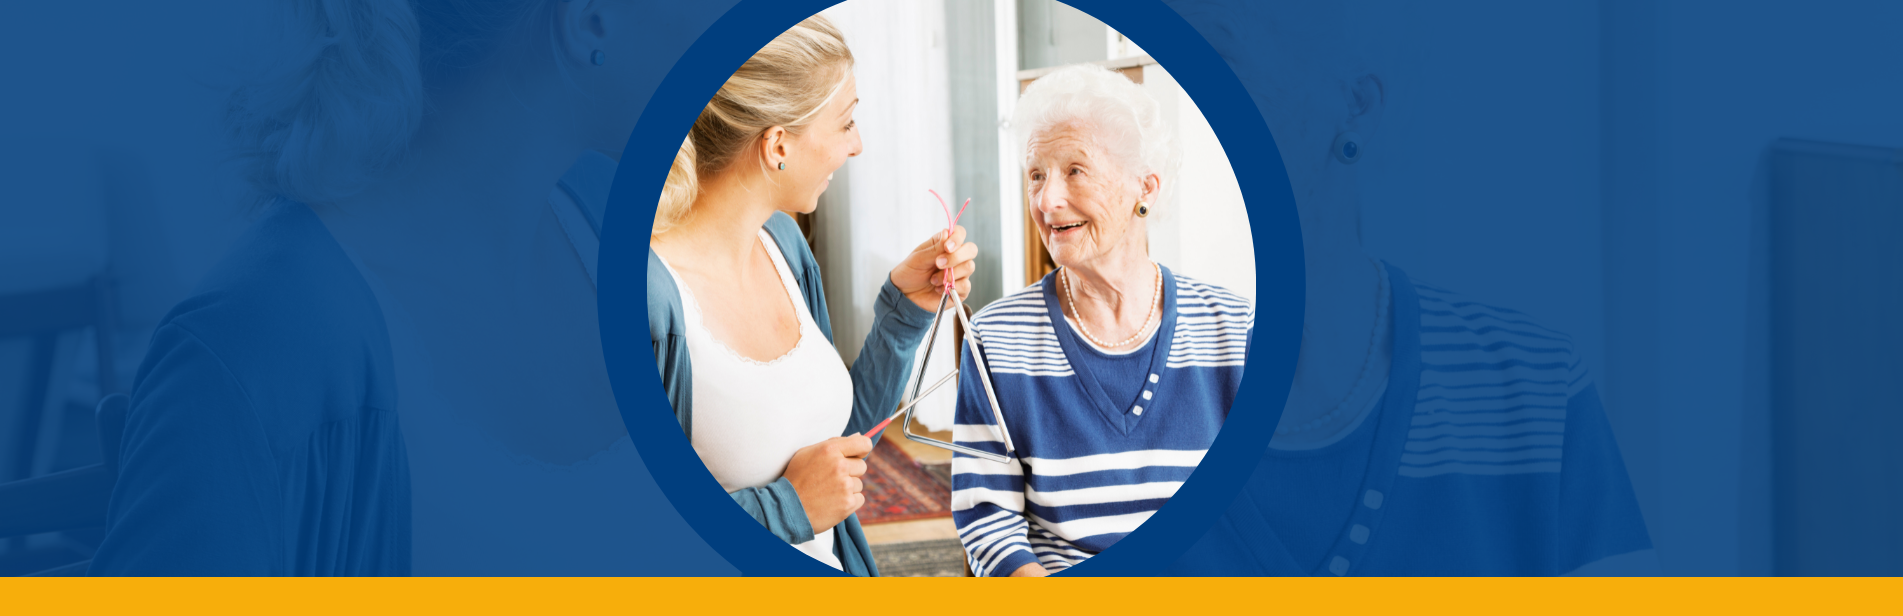 The Benefits of Exercise and Physical Therapy for Seniors Receiving Homecare